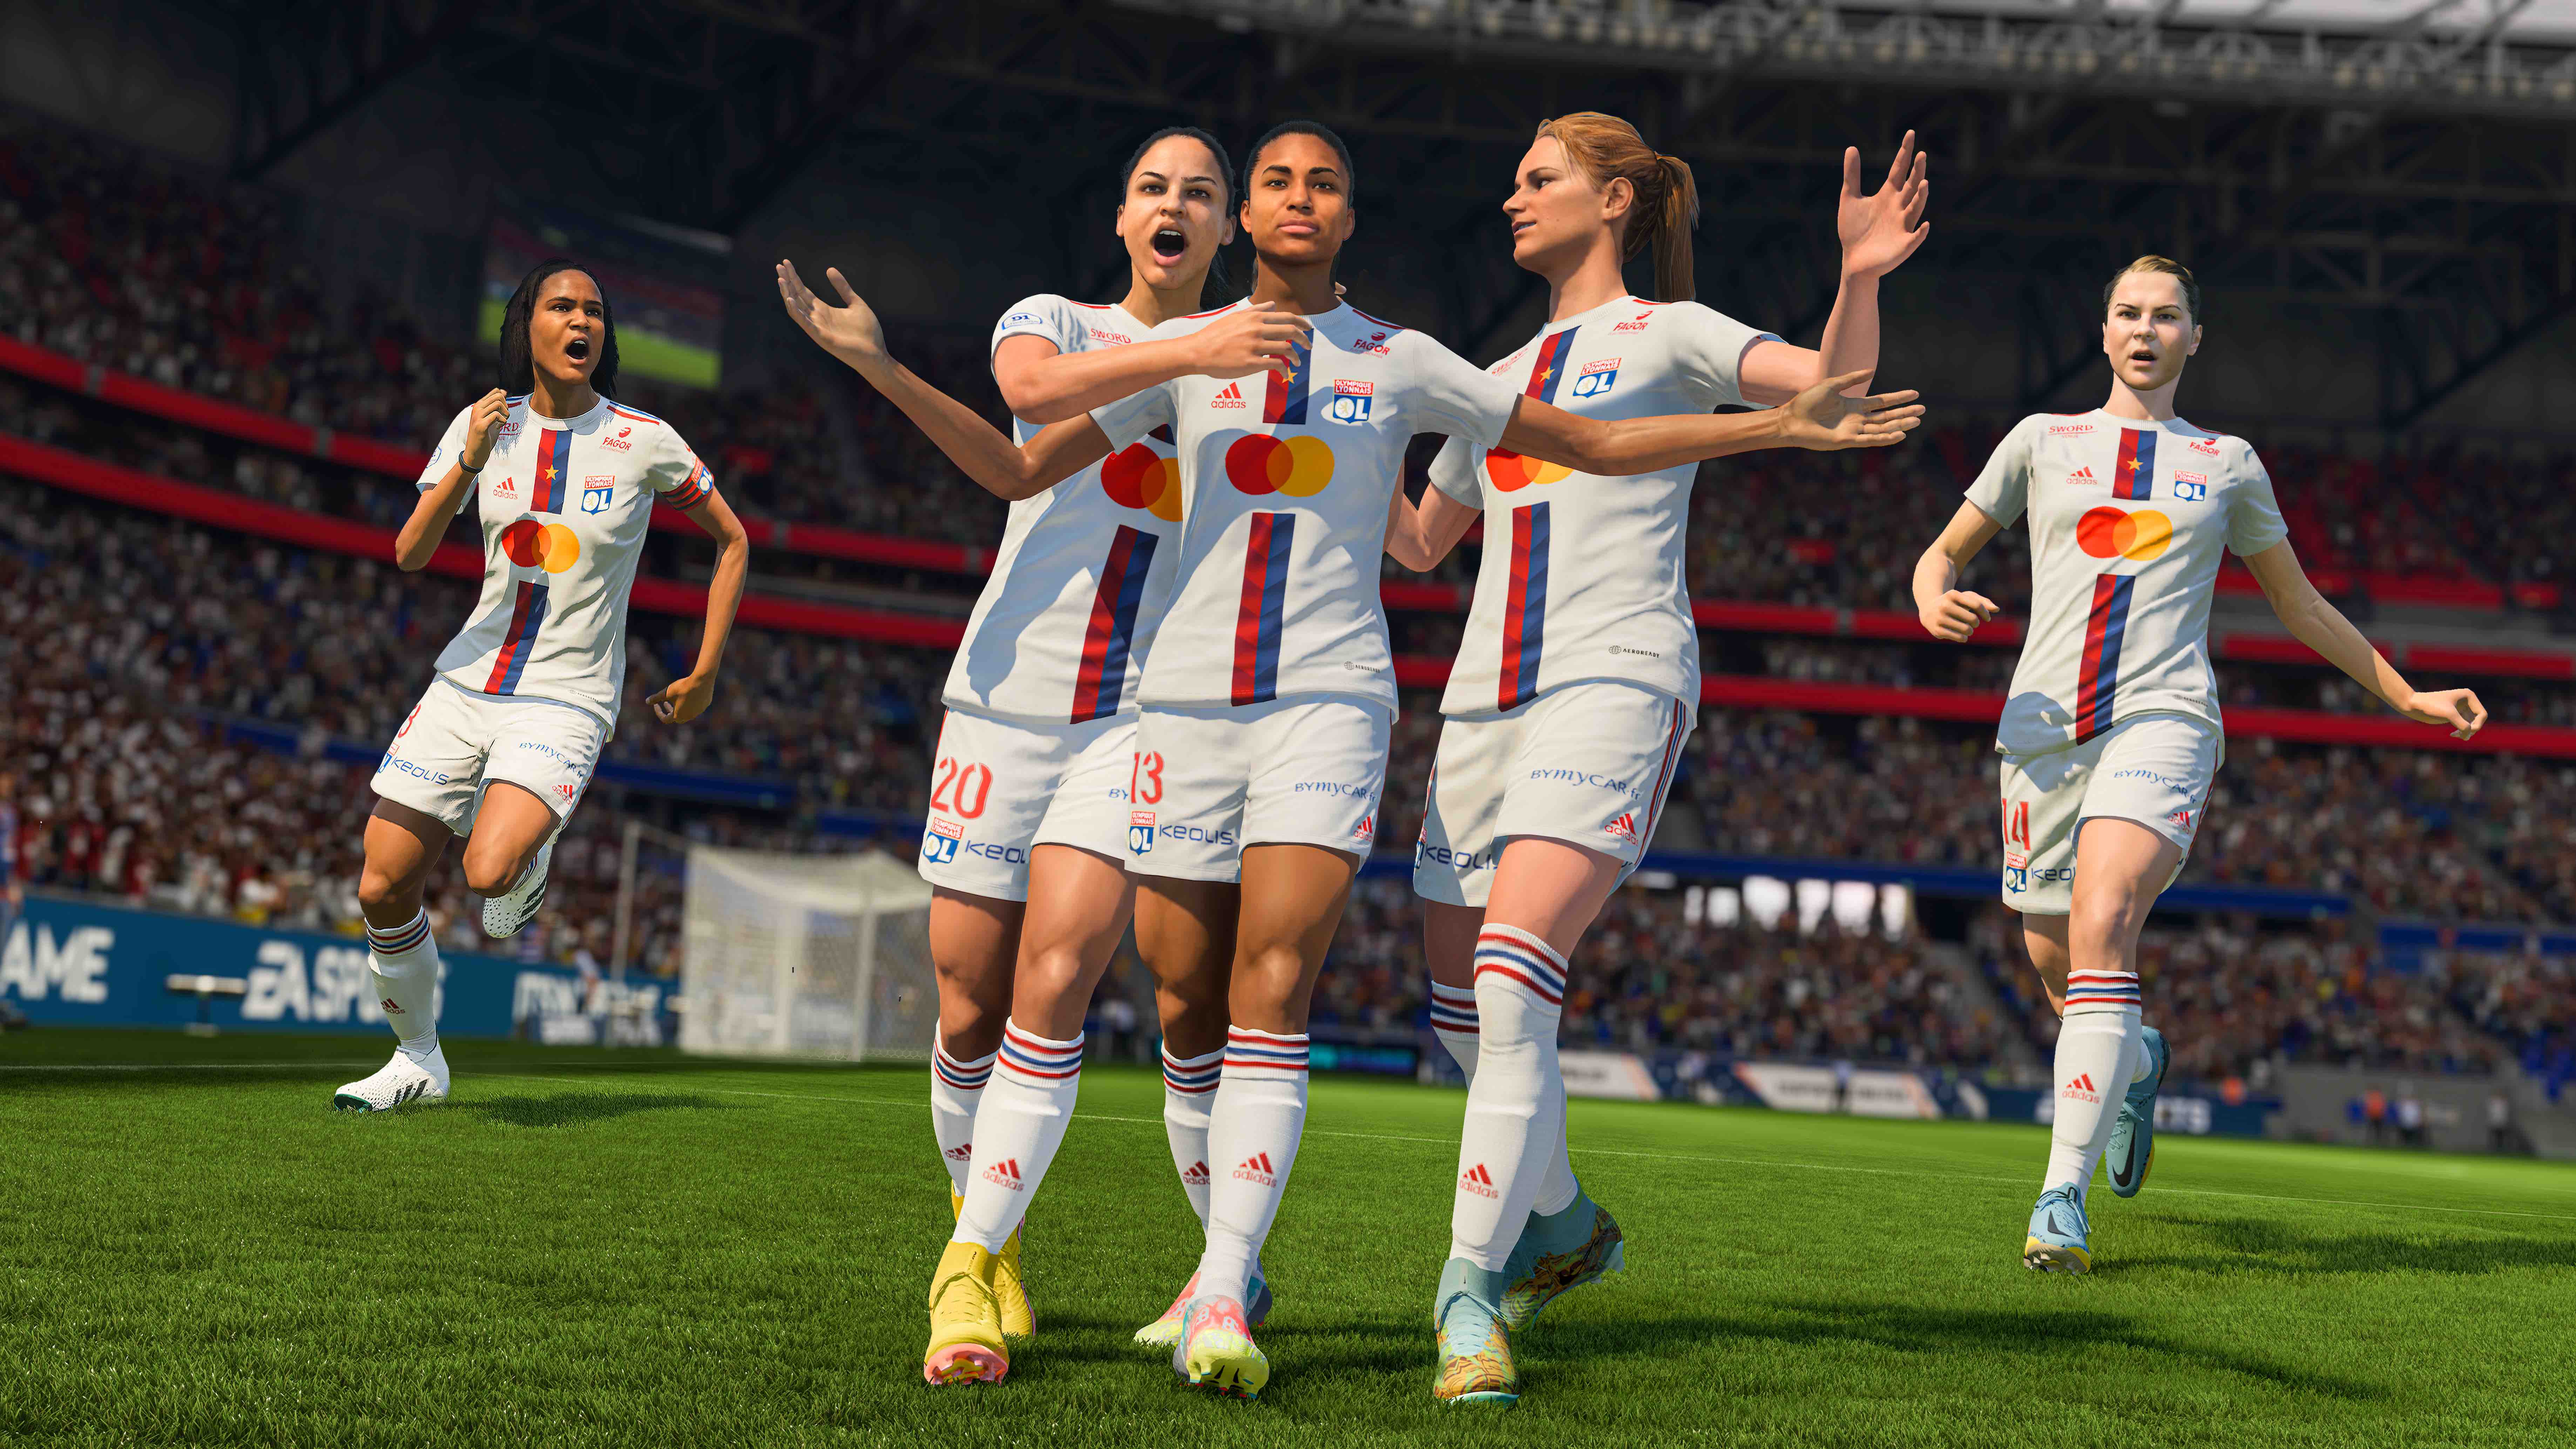 EA SPORTS™ FIFA 23 DELIVERS THE MOST COMPLETE INTERACTIVE FOOTBALL EXPERIENCE YET, WITH HYPERMOTION2, GENERATIONAL CROSS-PLAY, WOMEN’S CLUB FOOTBALL, AND BOTH MEN’S AND WOMEN’S FIFA WORLD CUPS™